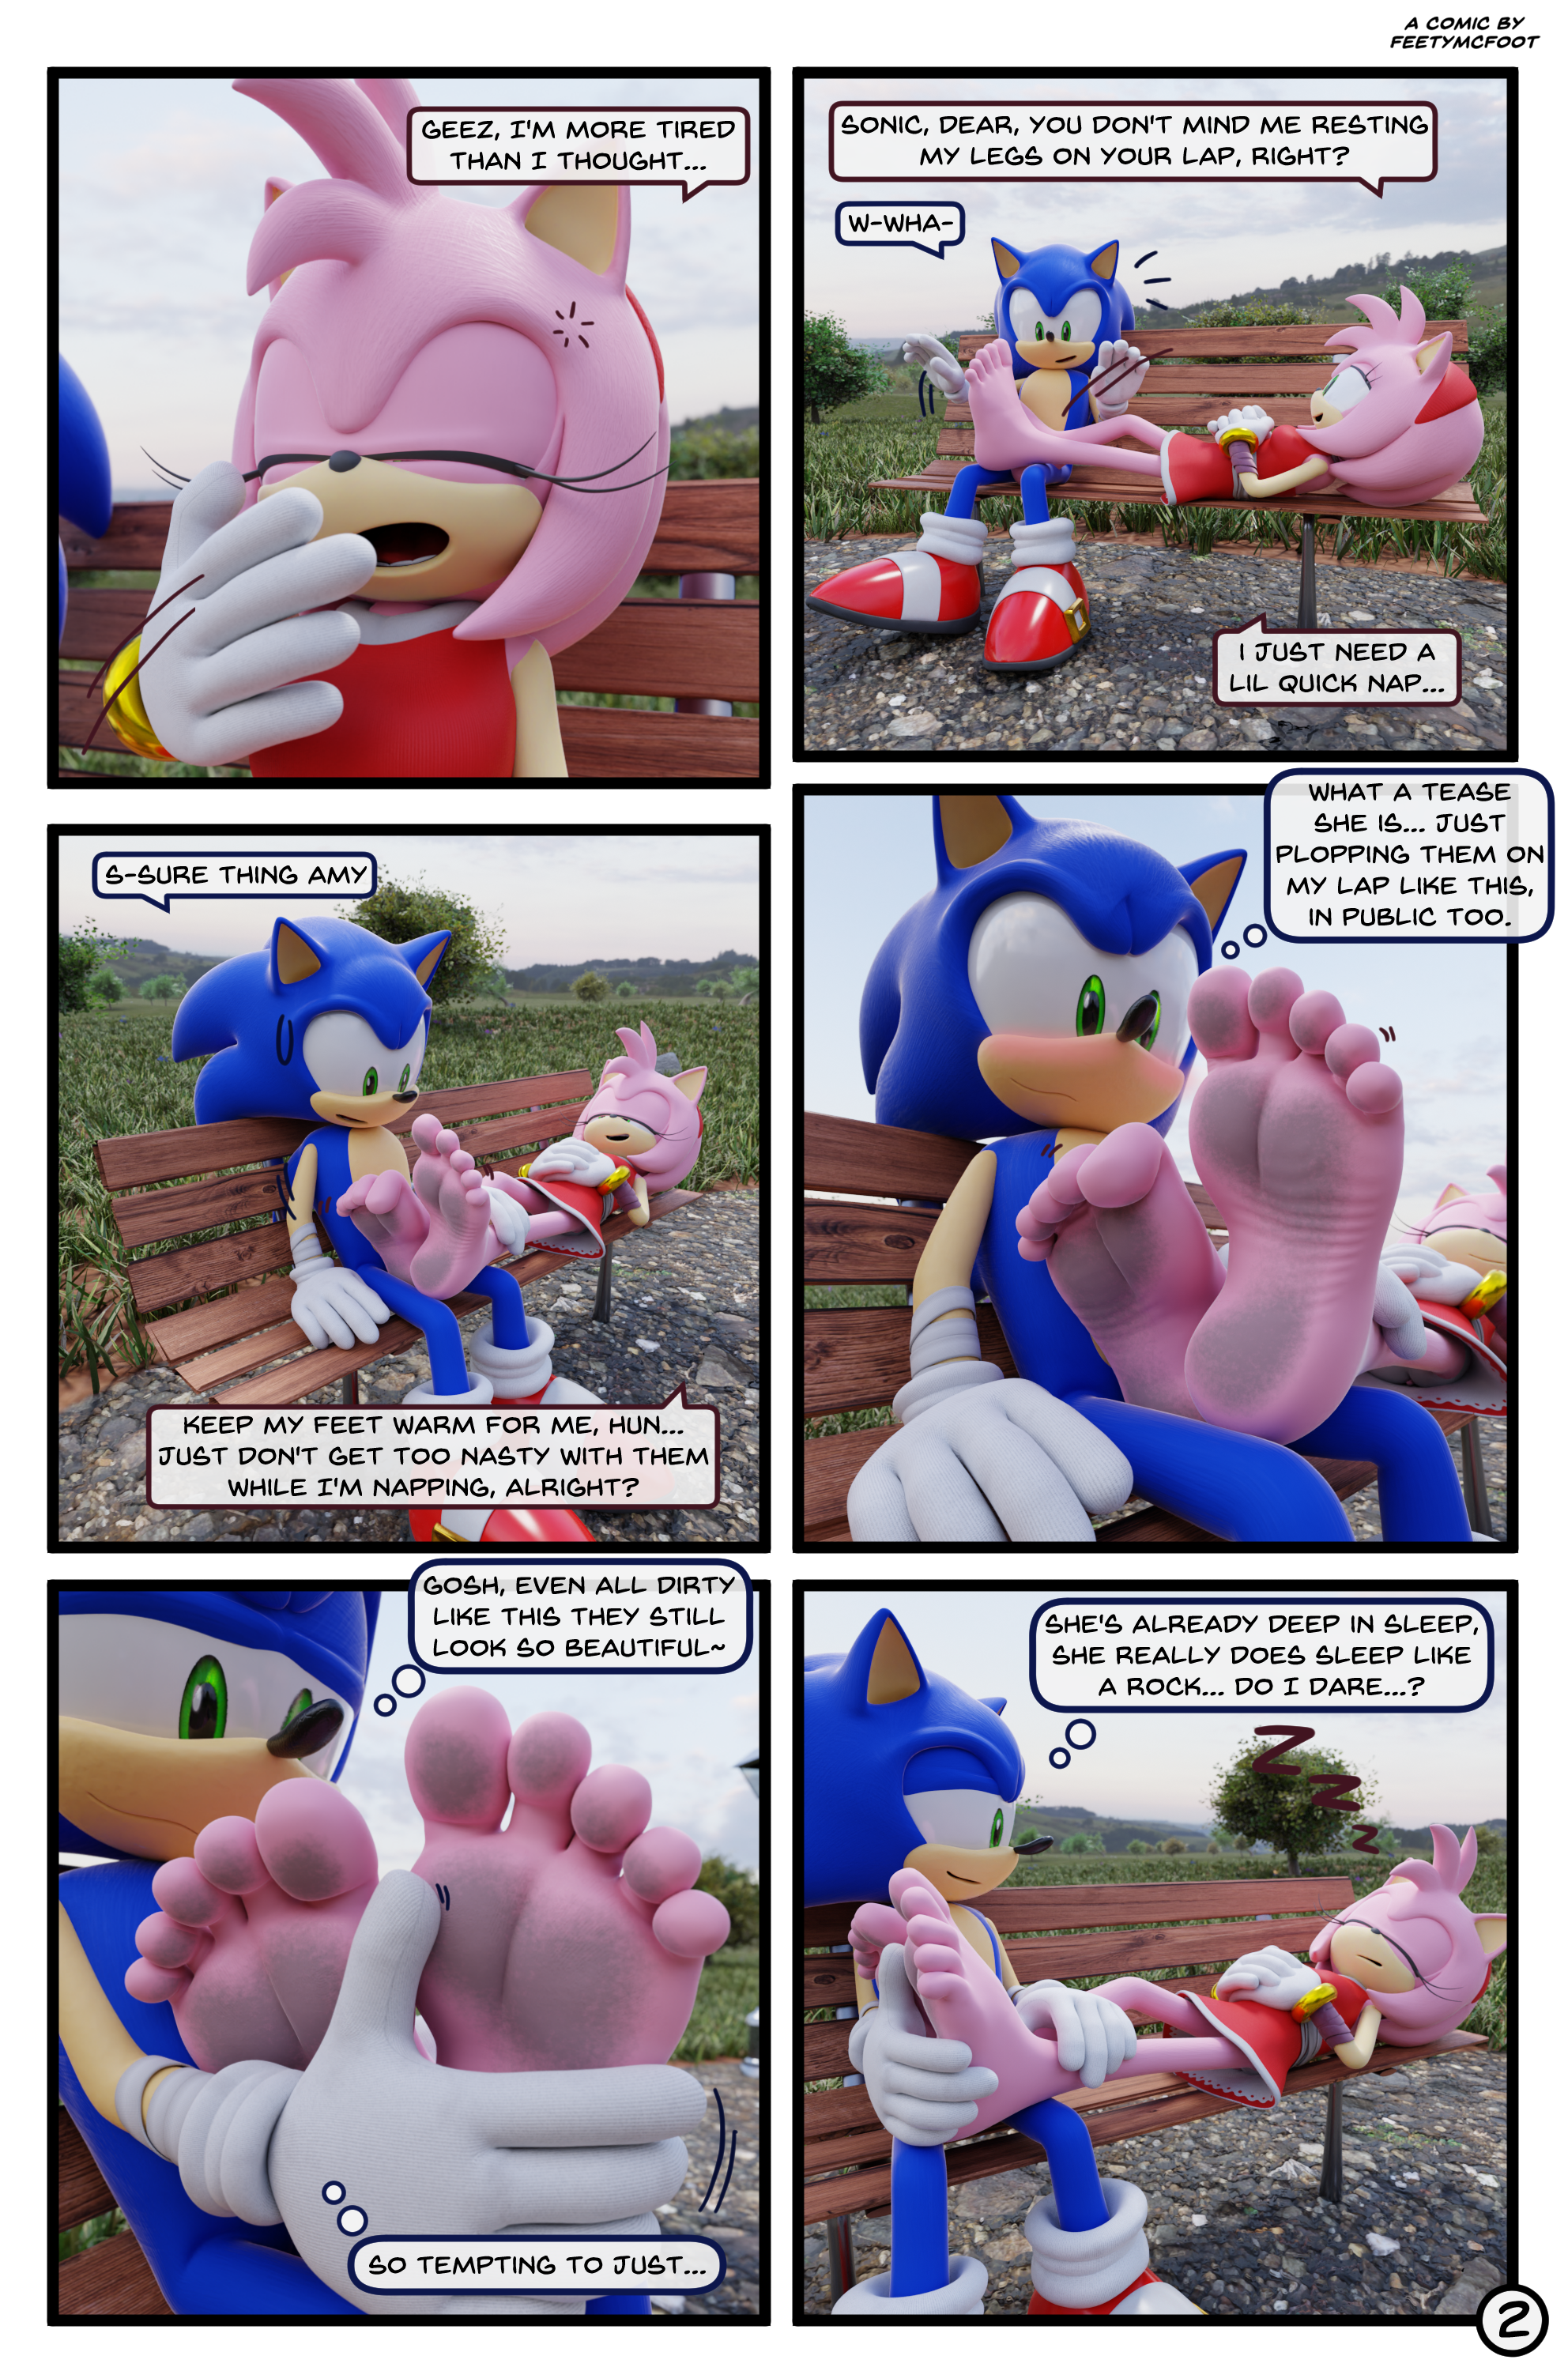 A Walk in the Park - Page 2 by FeetyMcFoot -- Fur Affinity [dot] net